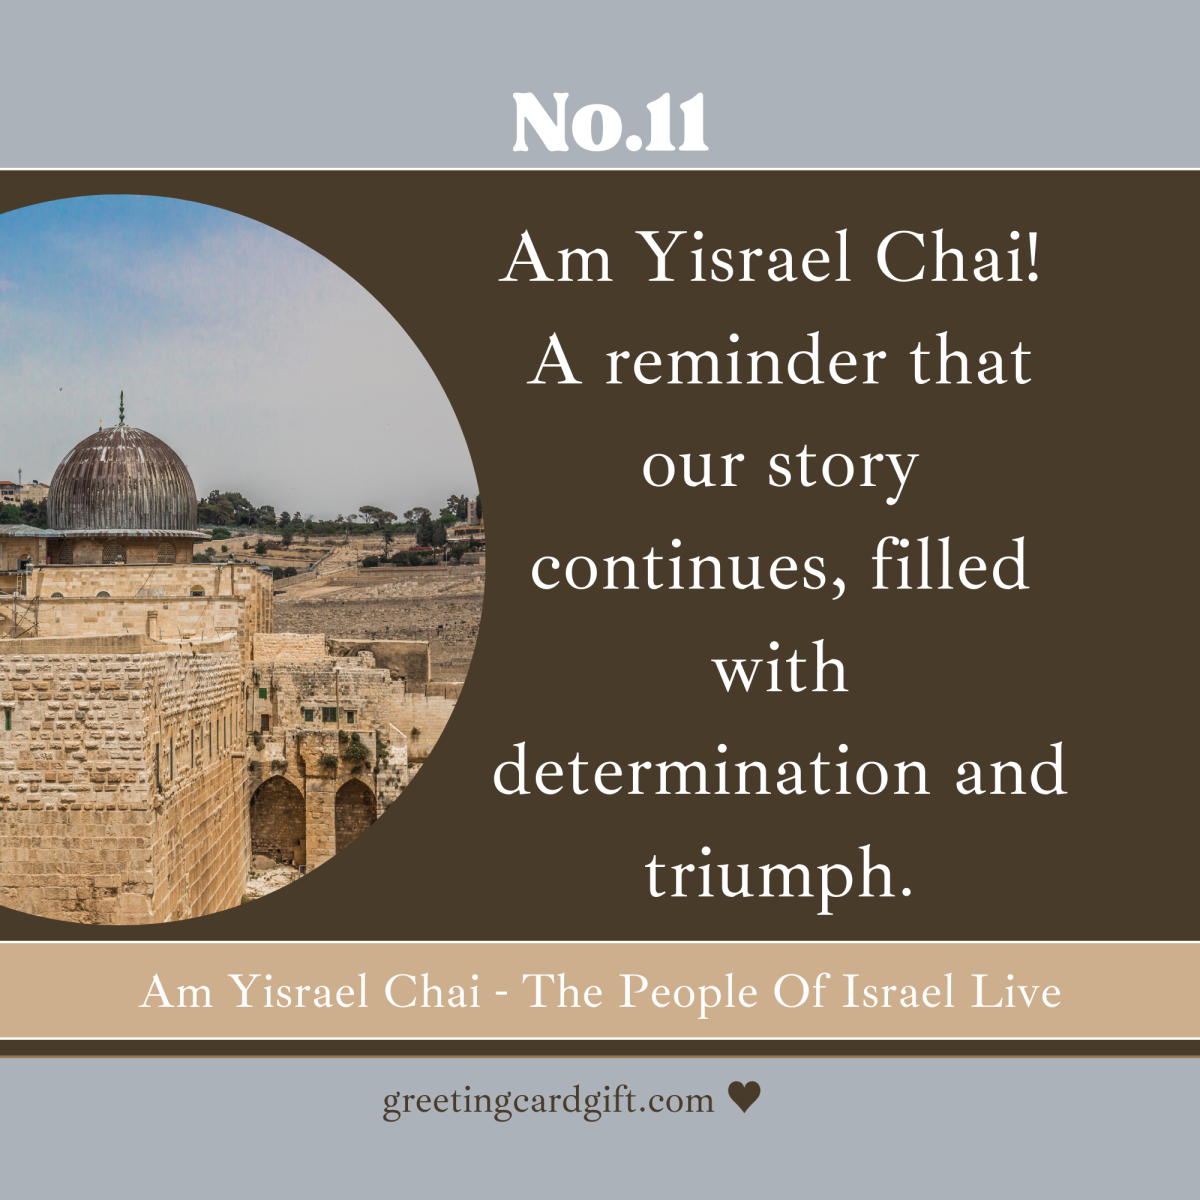 Am Yisrael Chai – The People Of Israel Live – No.11